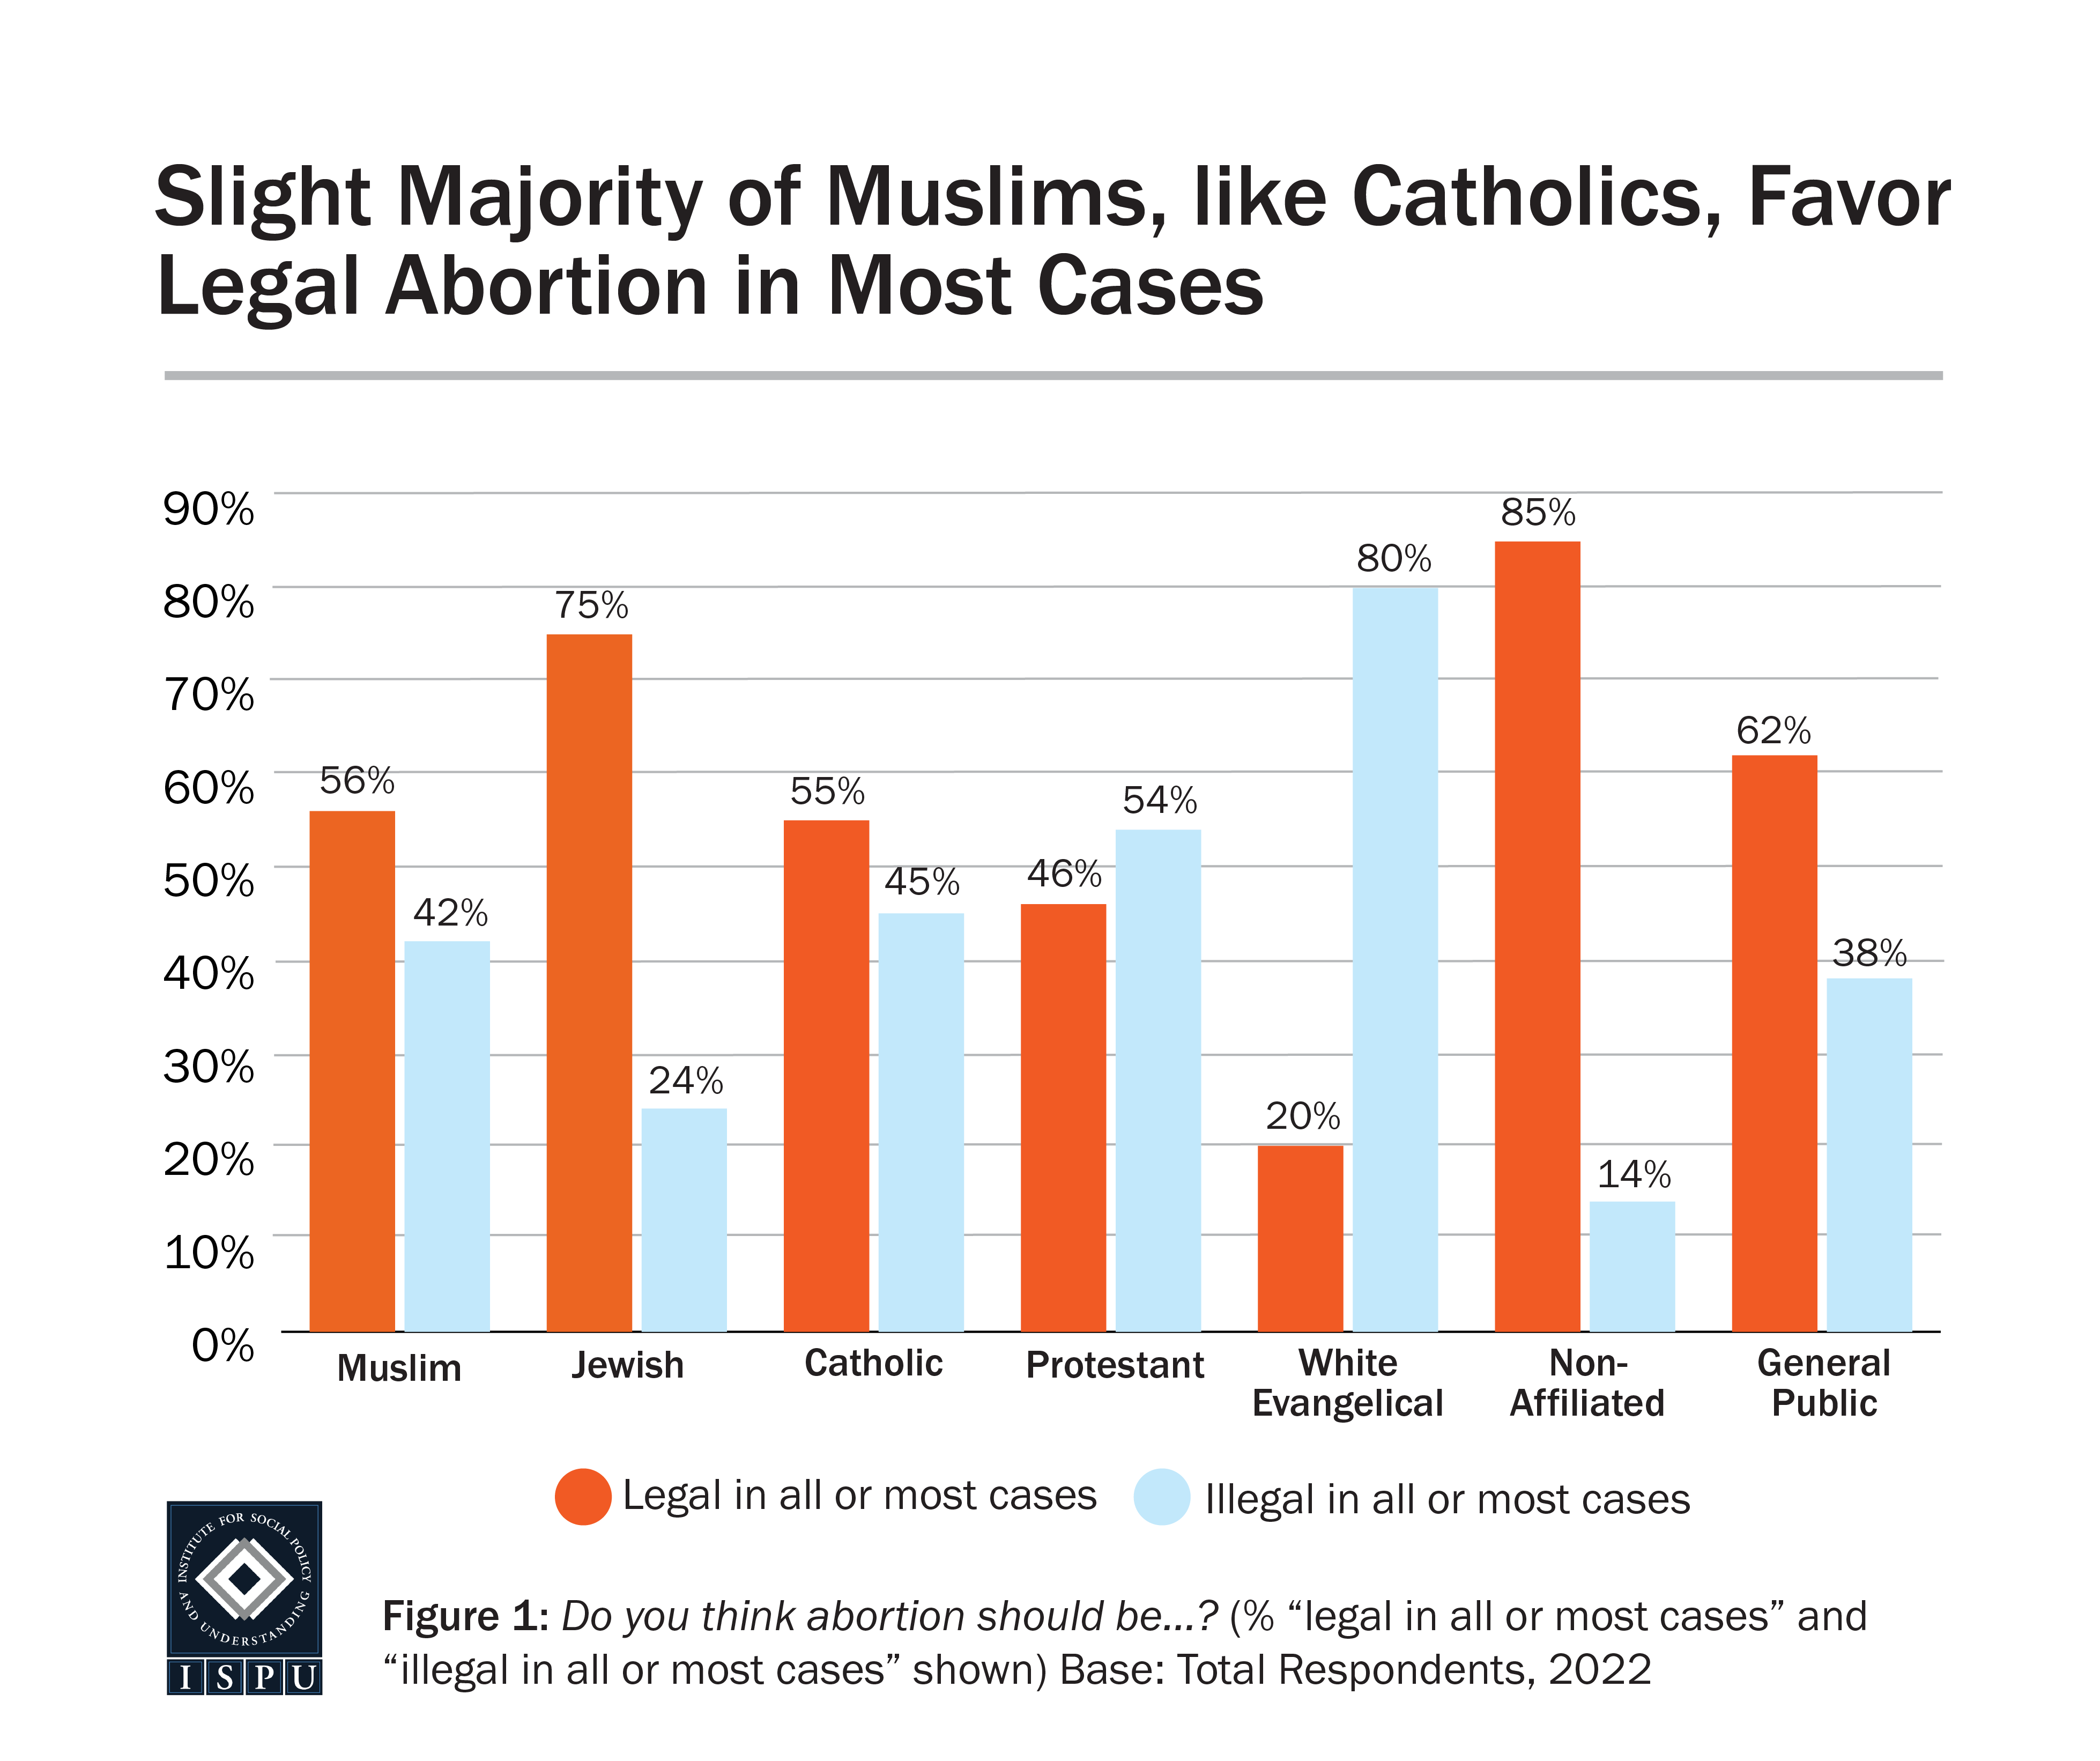 The majority of Muslims, alongside Catholics, Jews and the non-affiliated, believe that abortion should be legal in all or most cases.